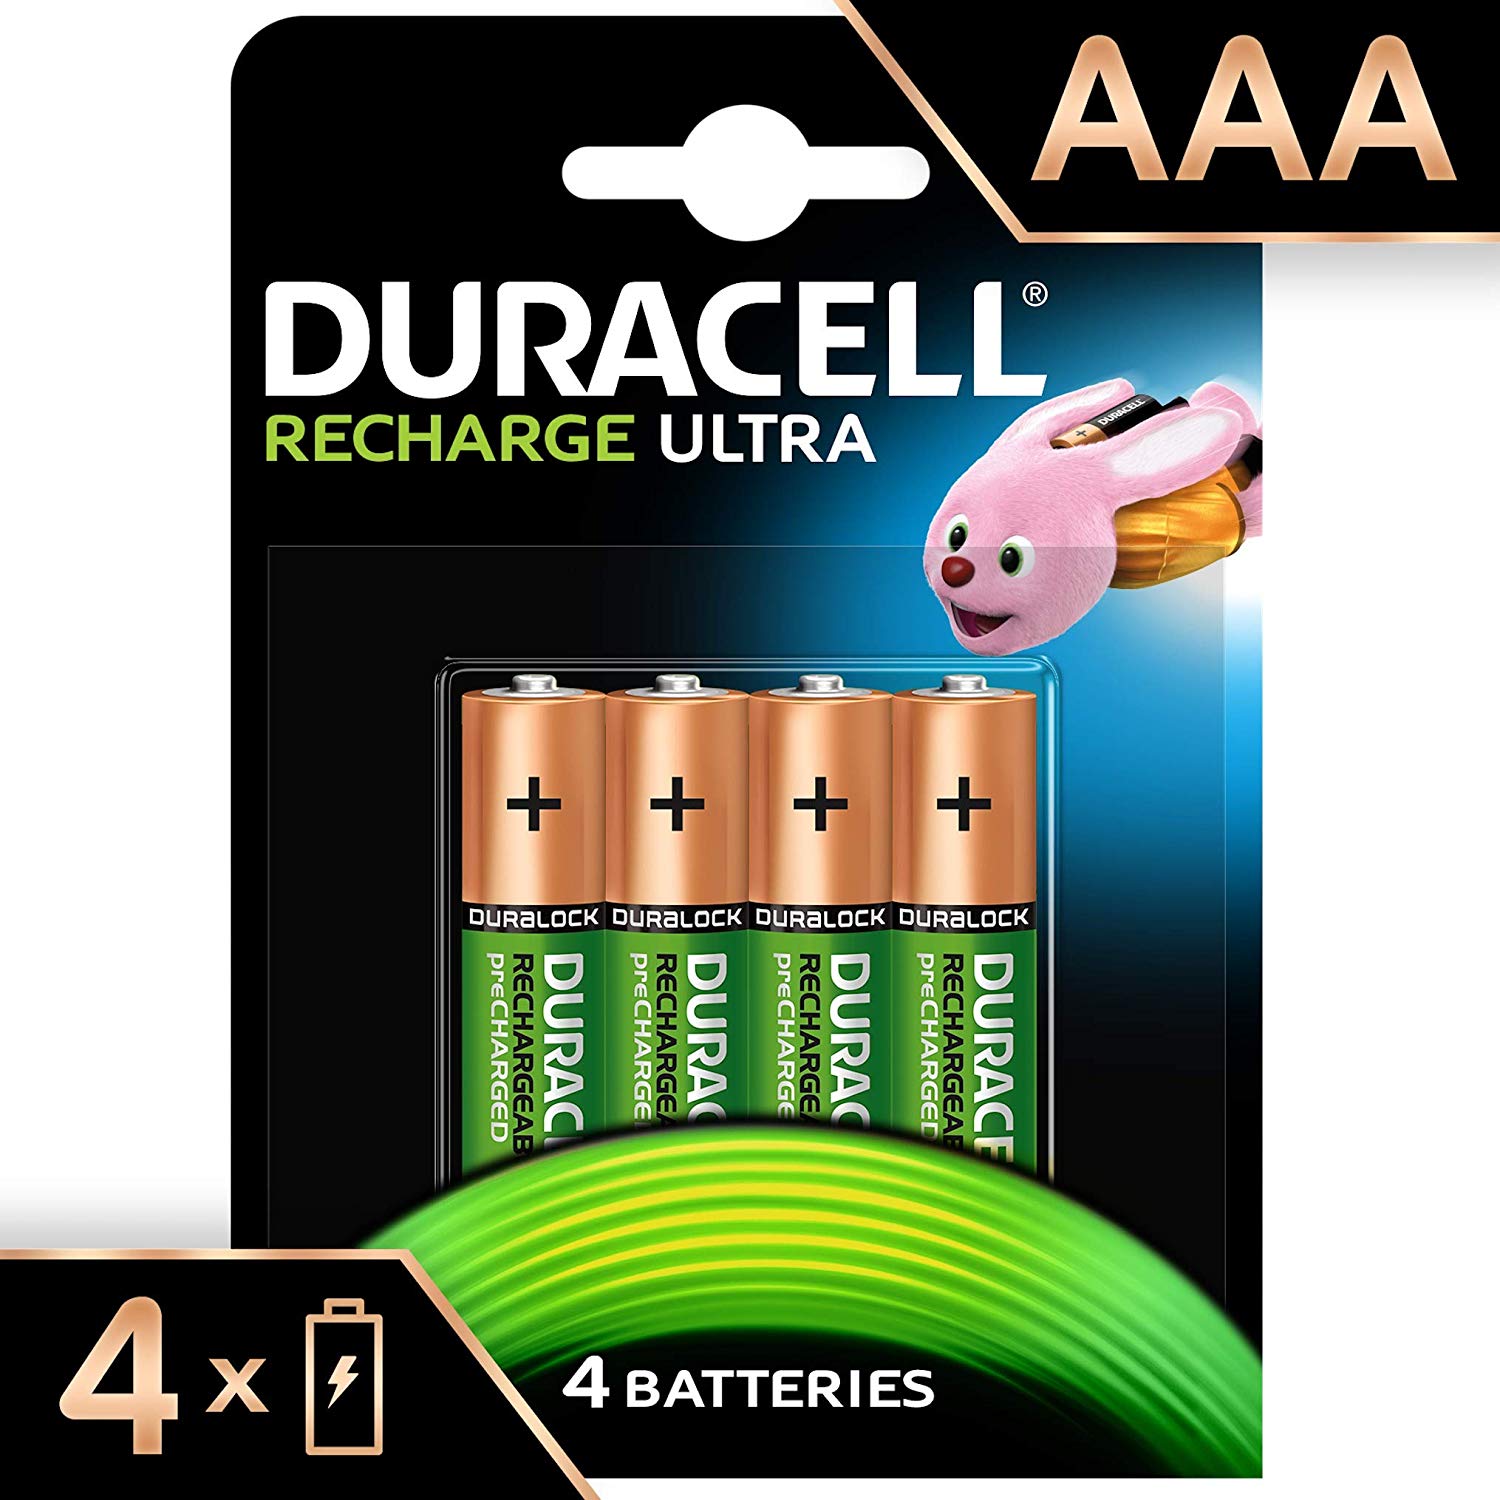 Pile ENERGIZER AAAA x2 Ultra+ 624625 - Cdiscount Jeux - Jouets